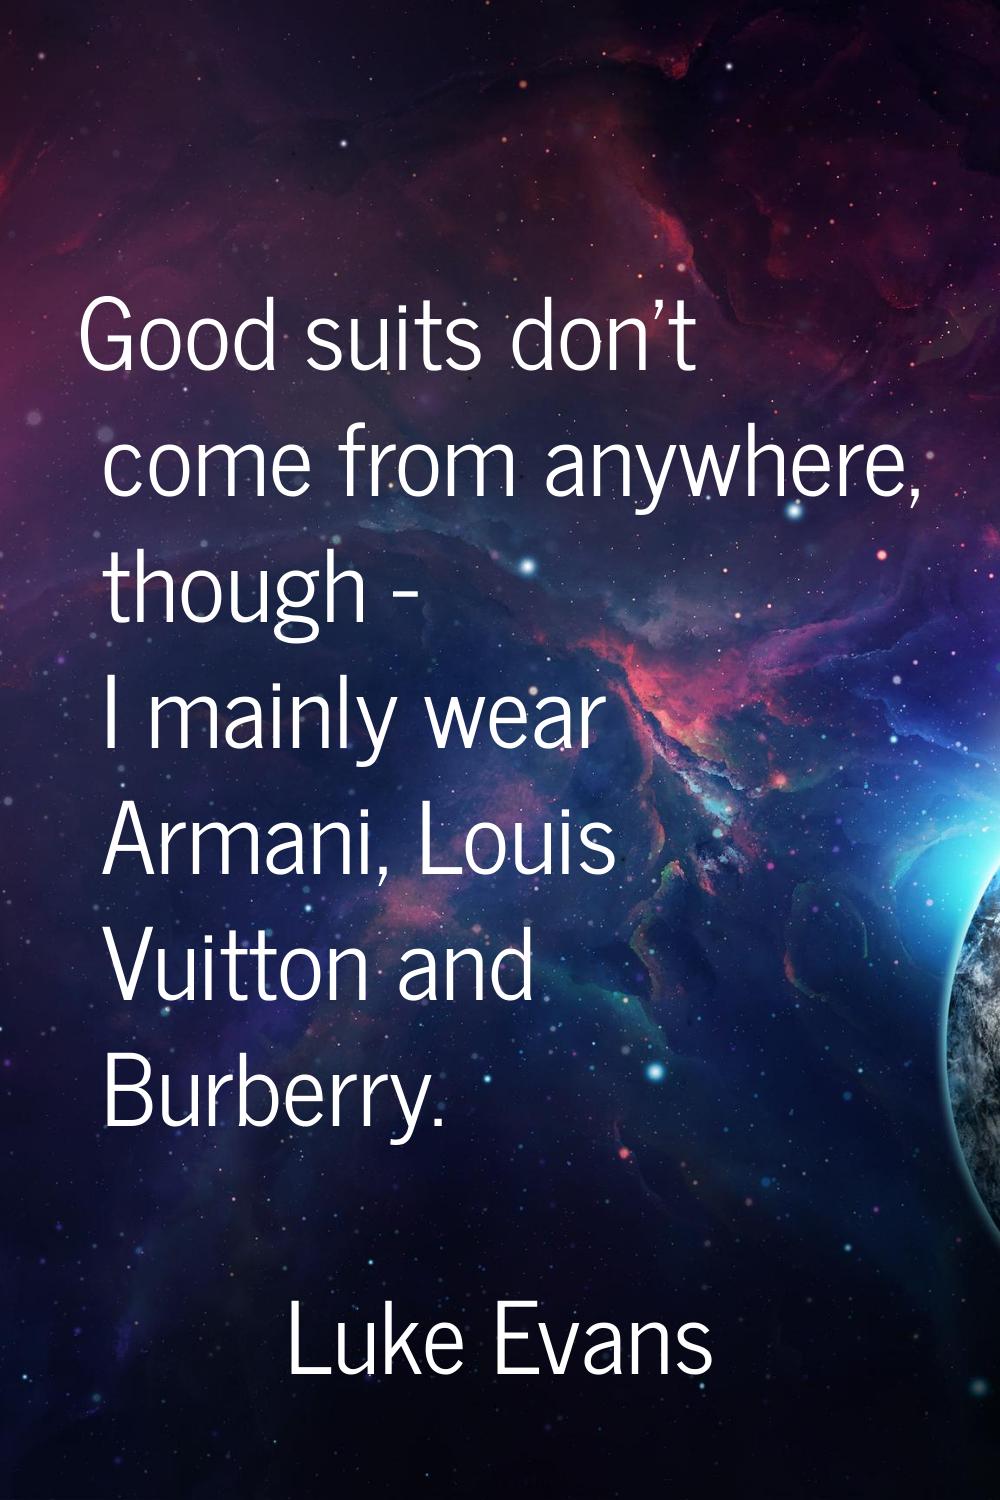 Good suits don't come from anywhere, though - I mainly wear Armani, Louis Vuitton and Burberry.